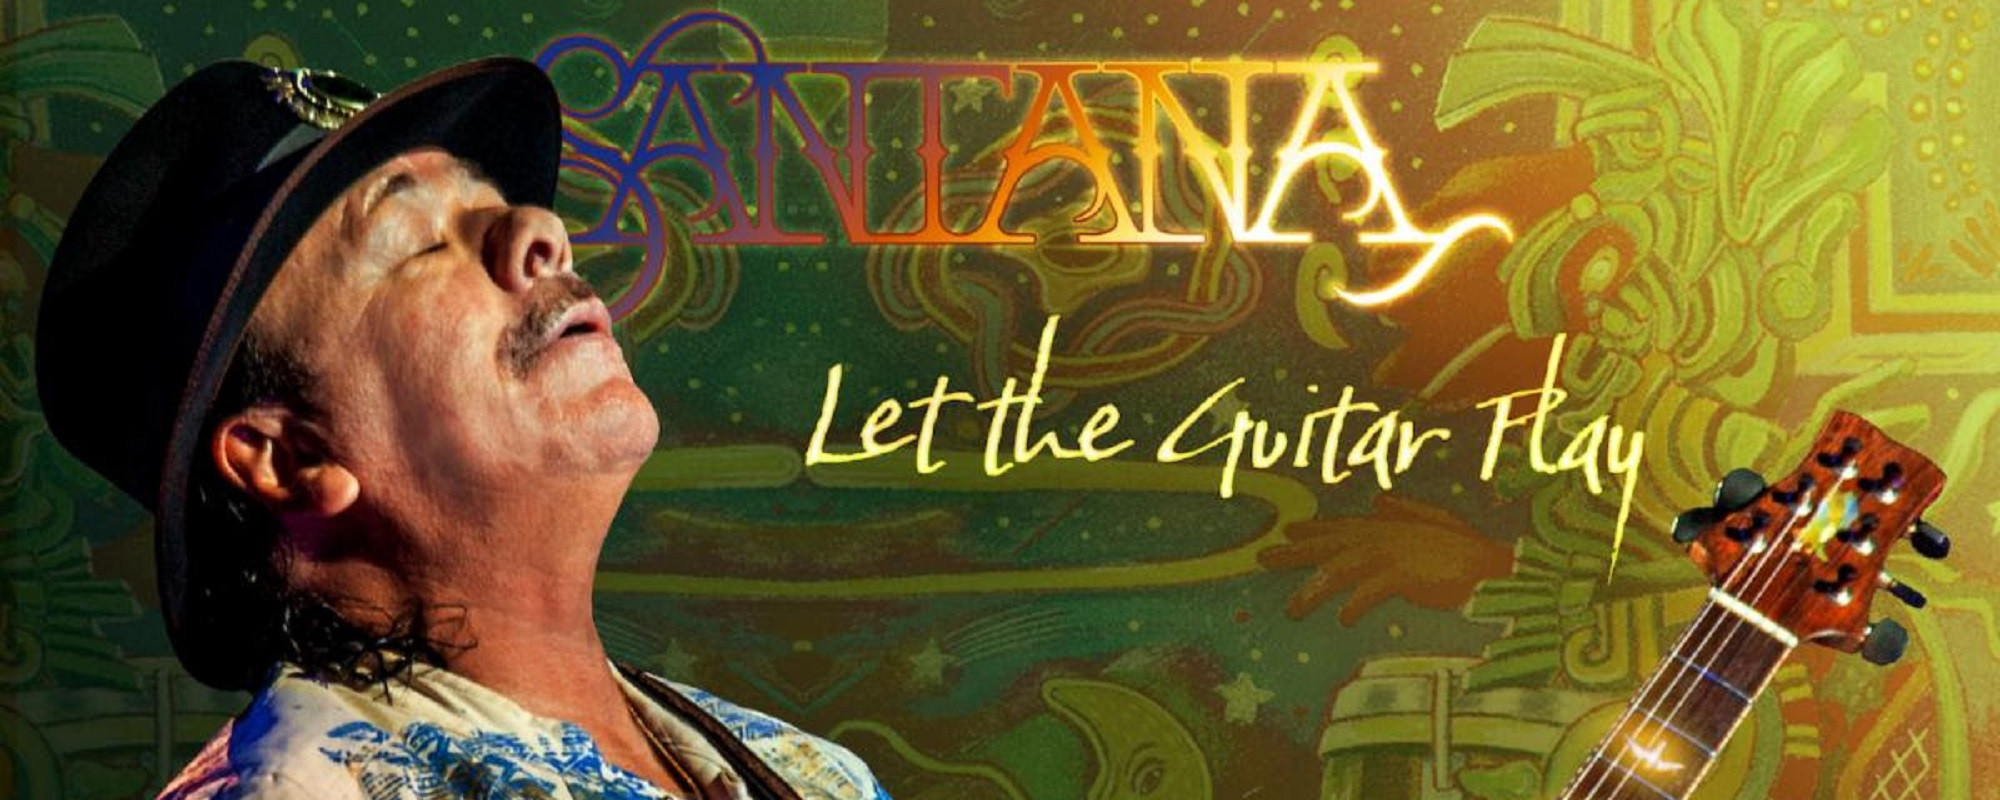 Santana Teams Up with DMC for “Smooth” Rap-Rock Single, “Let the Guitar Play” - American Songwriter